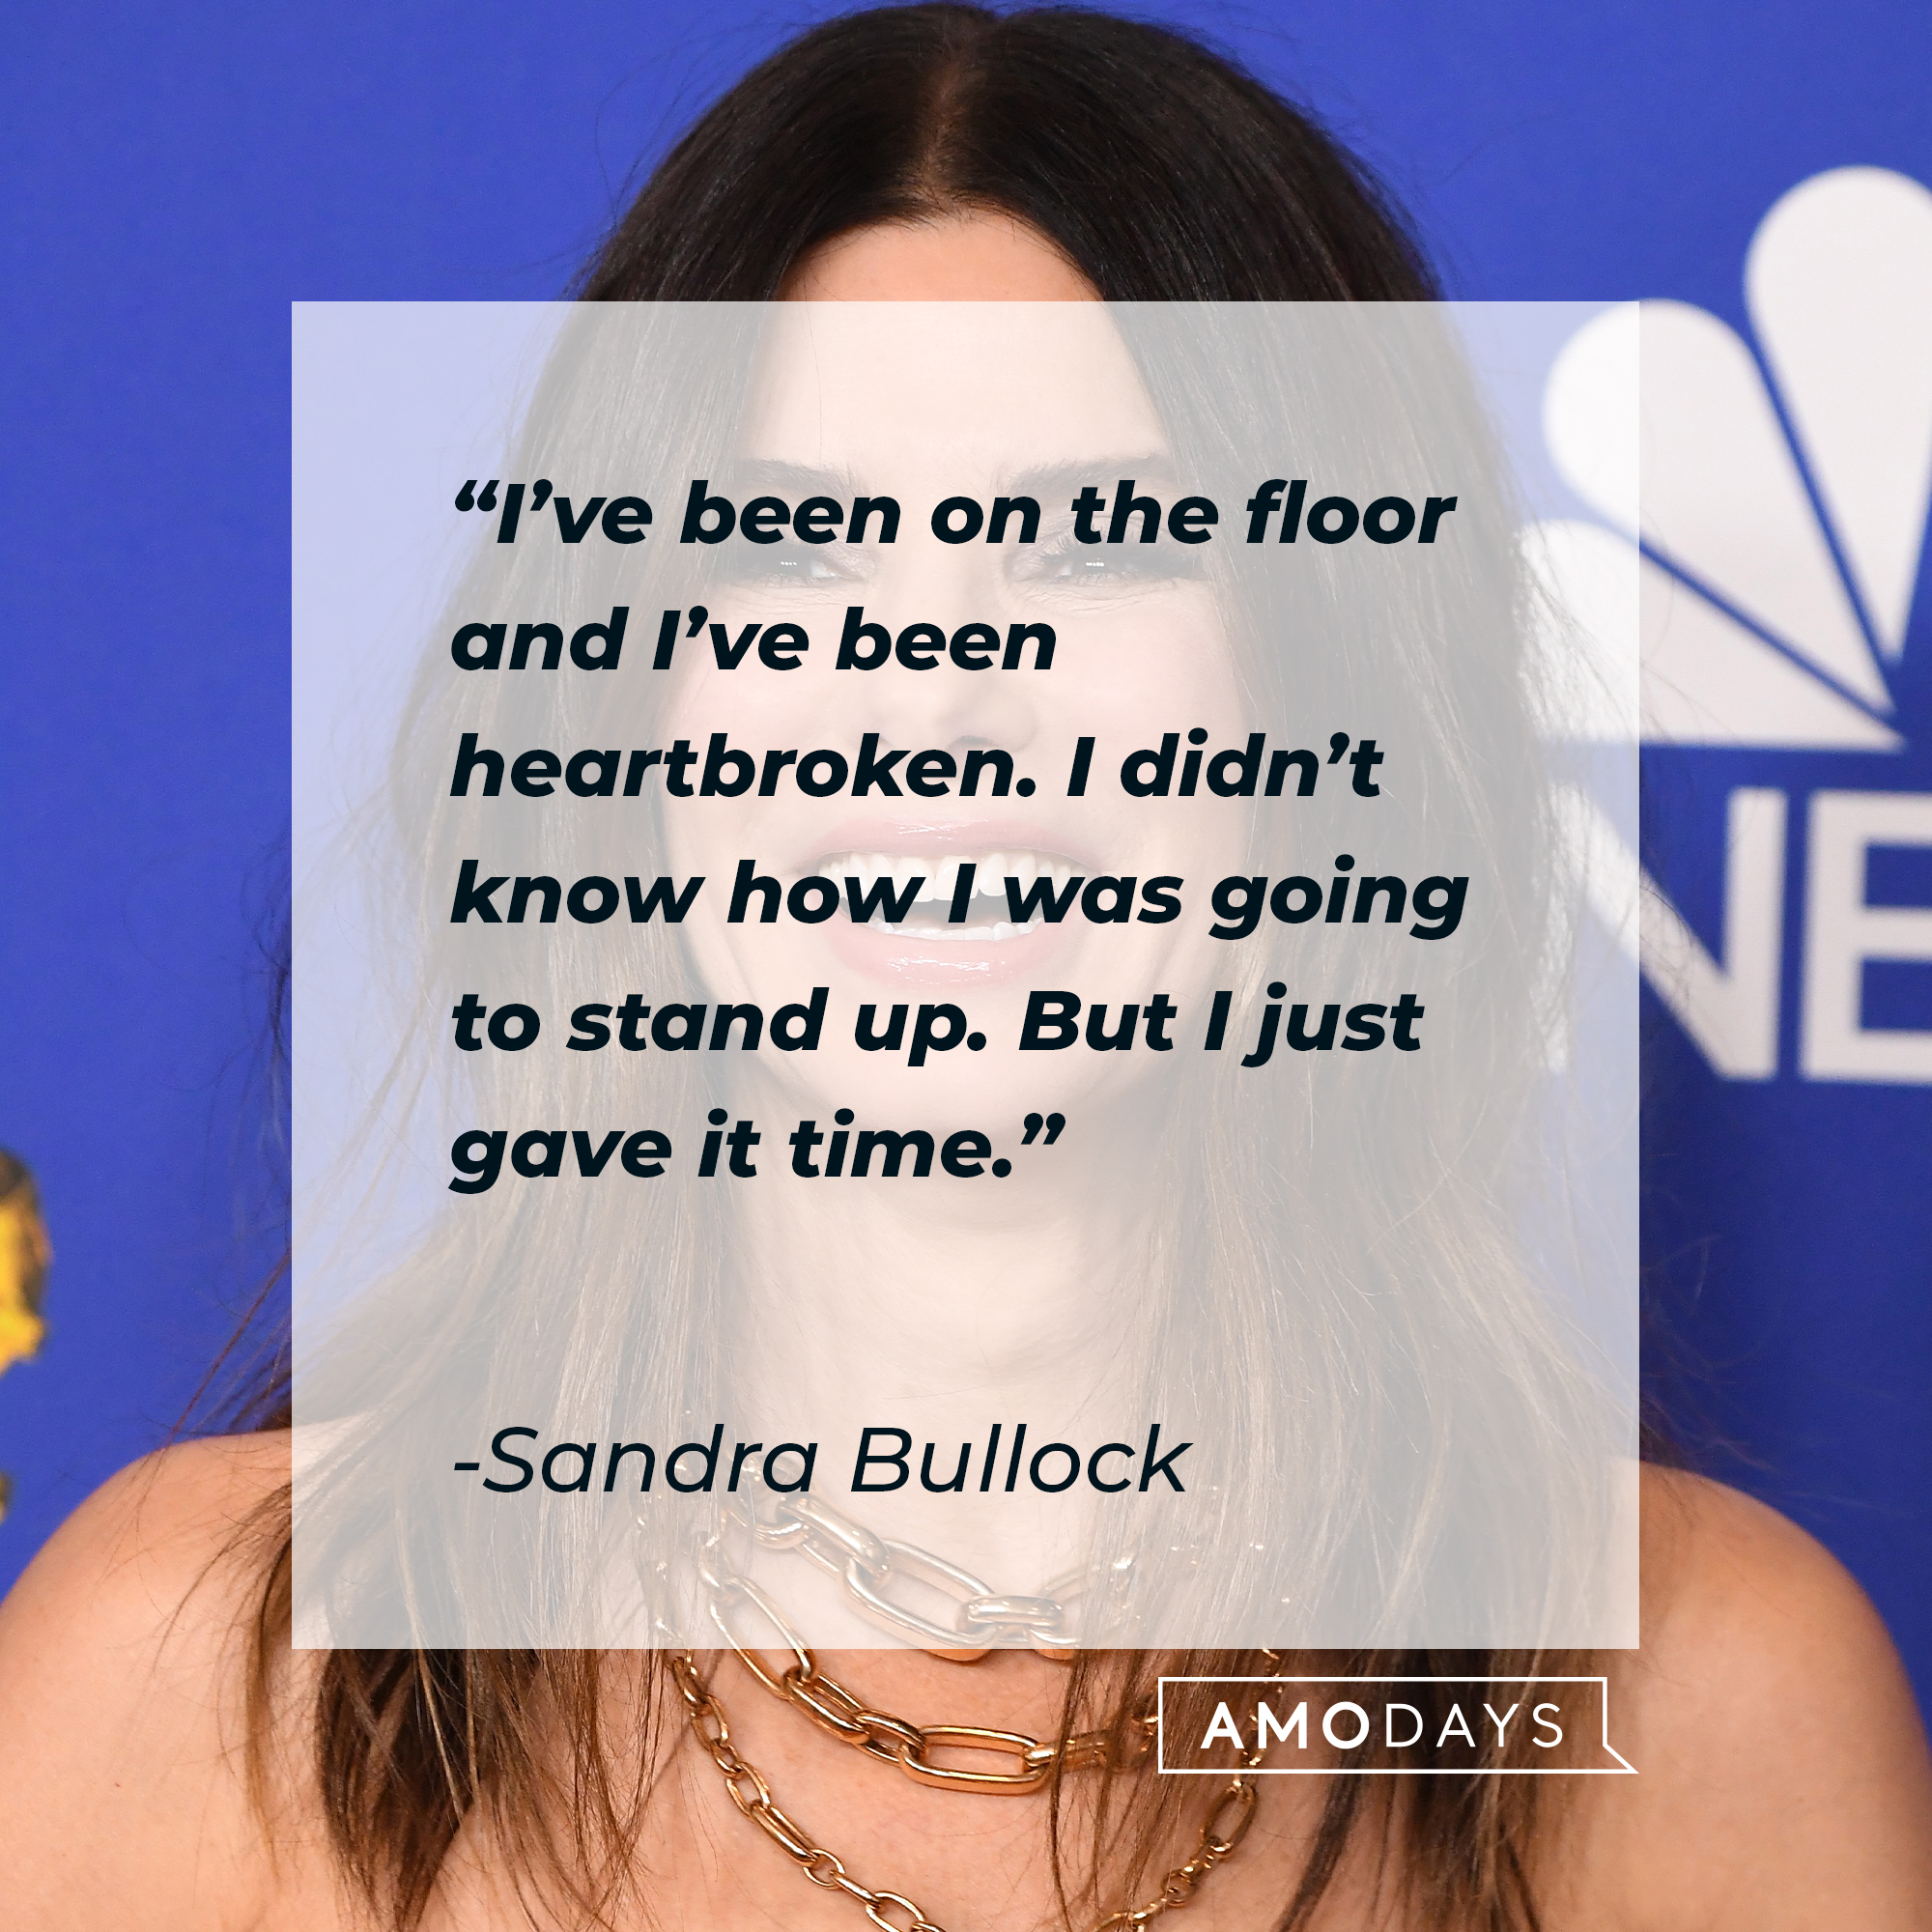 Sandra Bullock's quote: “I’ve been on the floor and I’ve been heartbroken. I didn’t know how I was going to stand up. But I just gave it time.” | Source: Getty Images